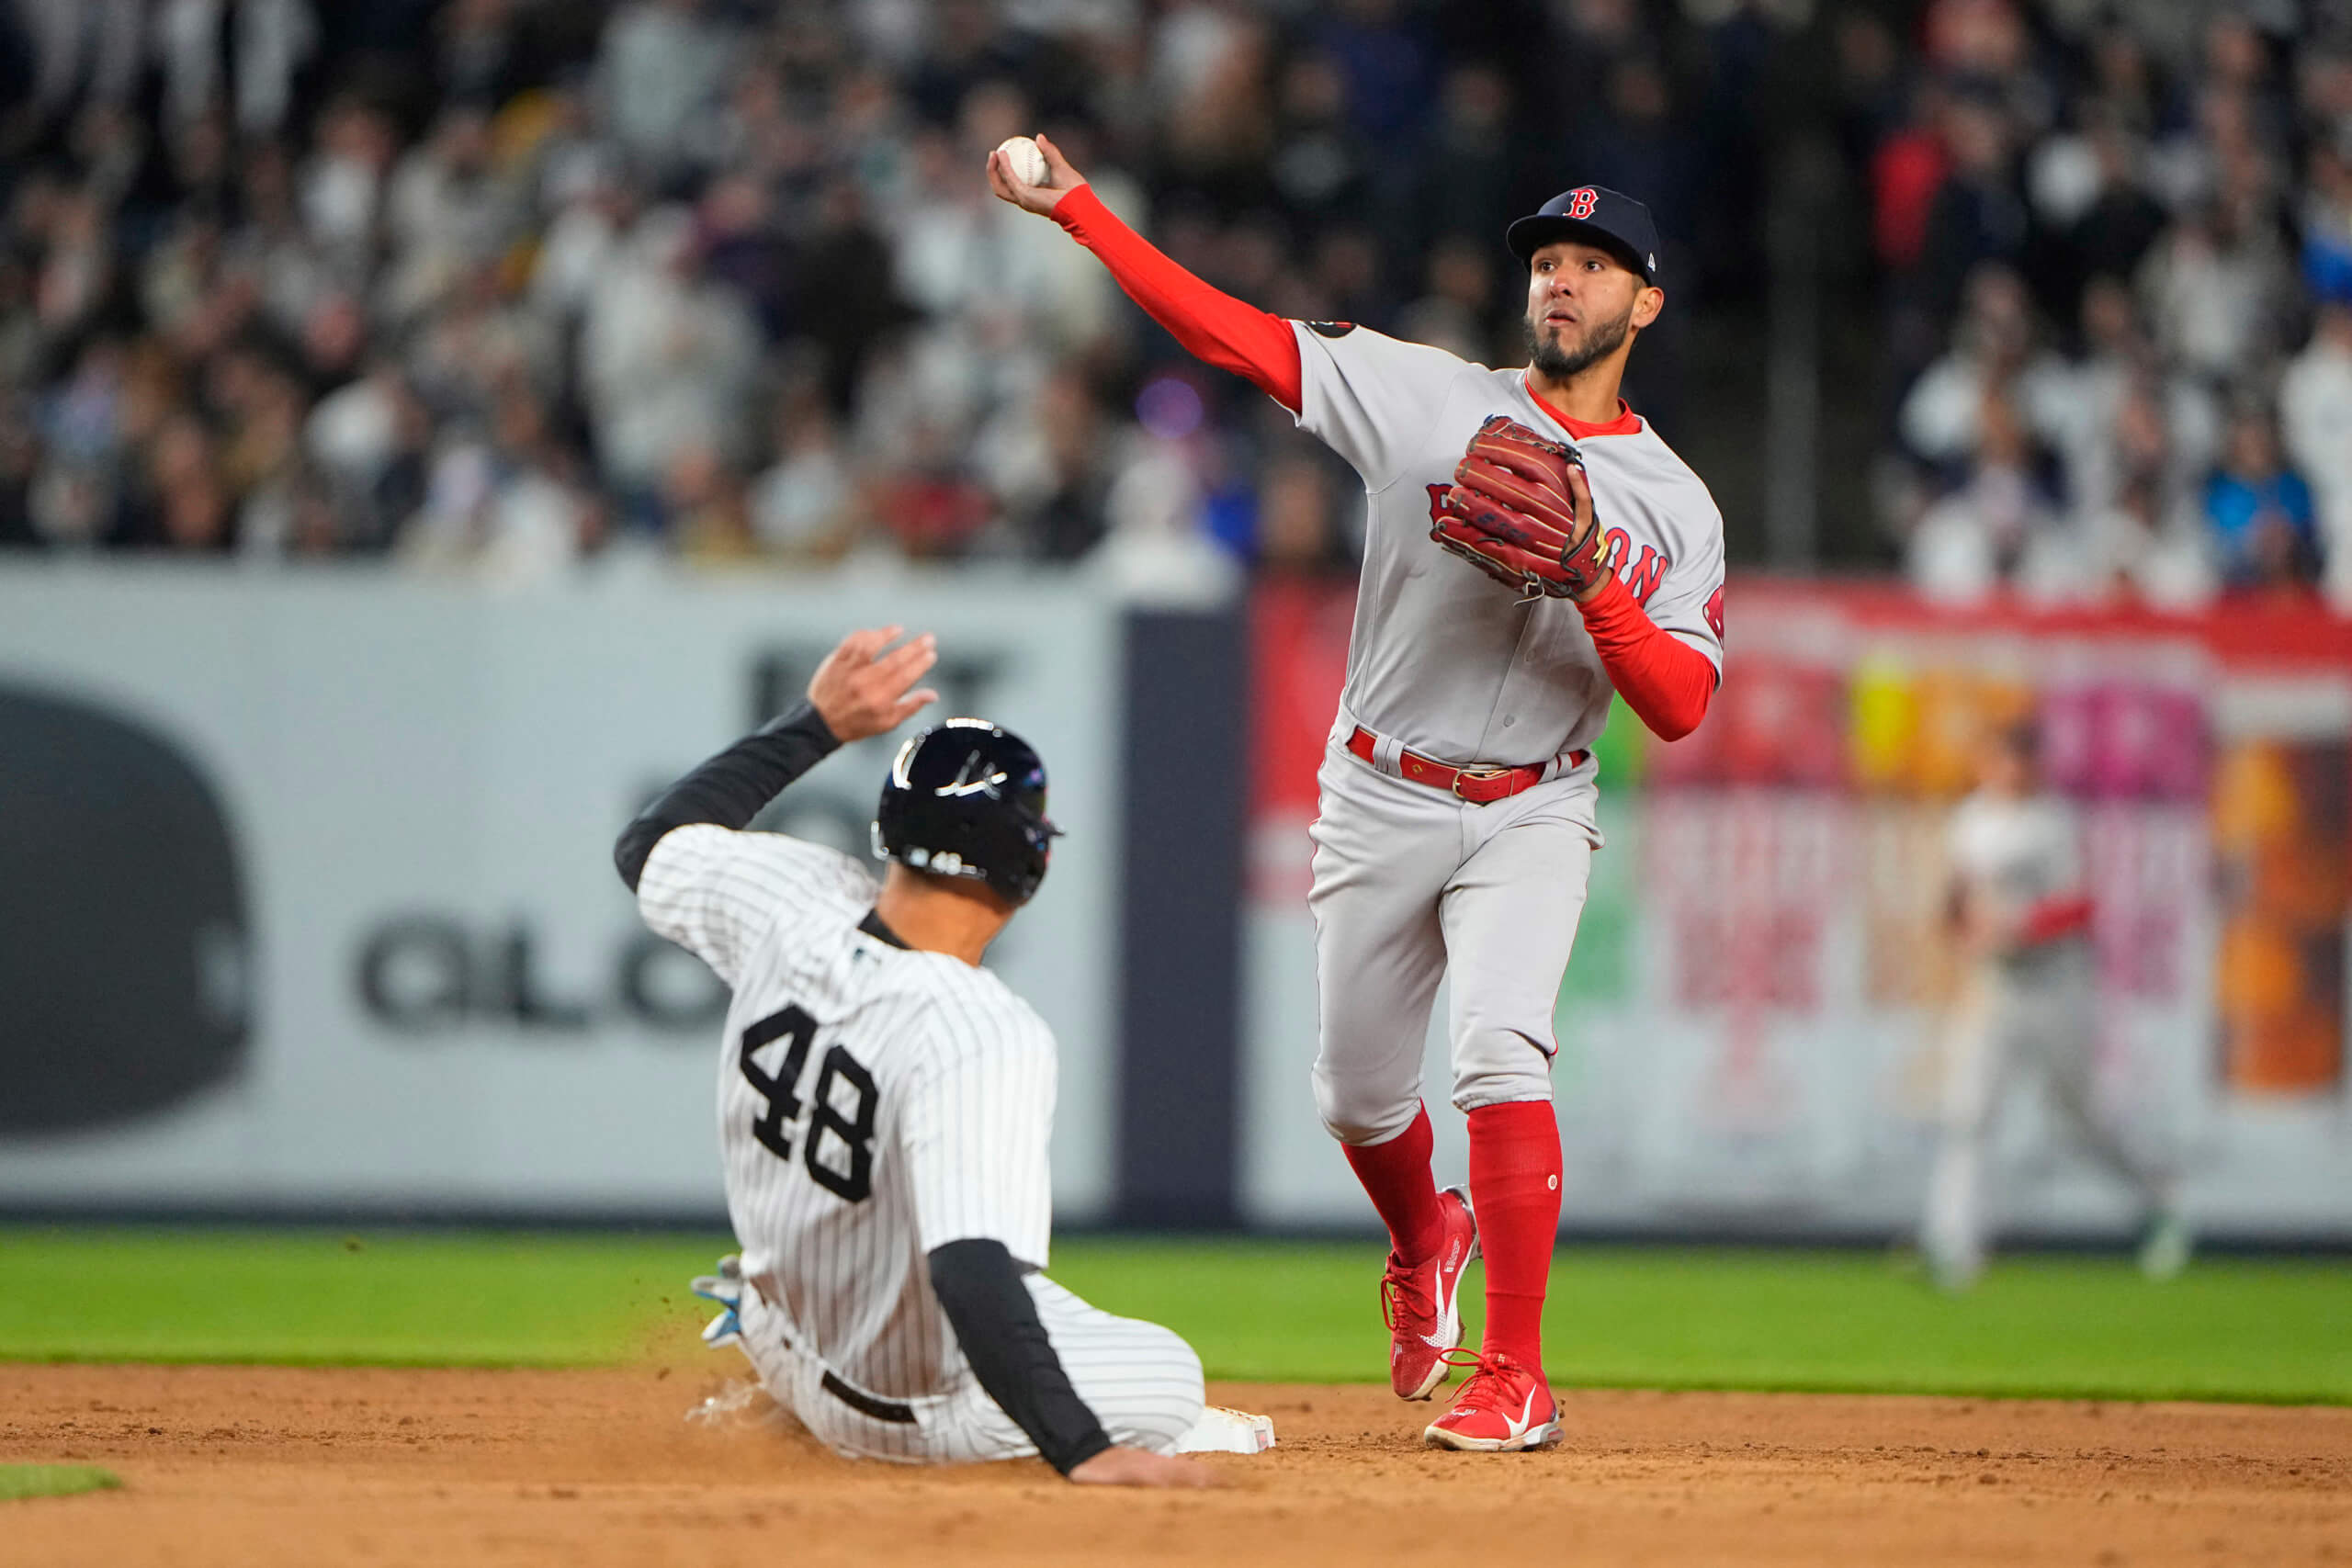 Sale shelled, Sox fall to Yankees in Game 1